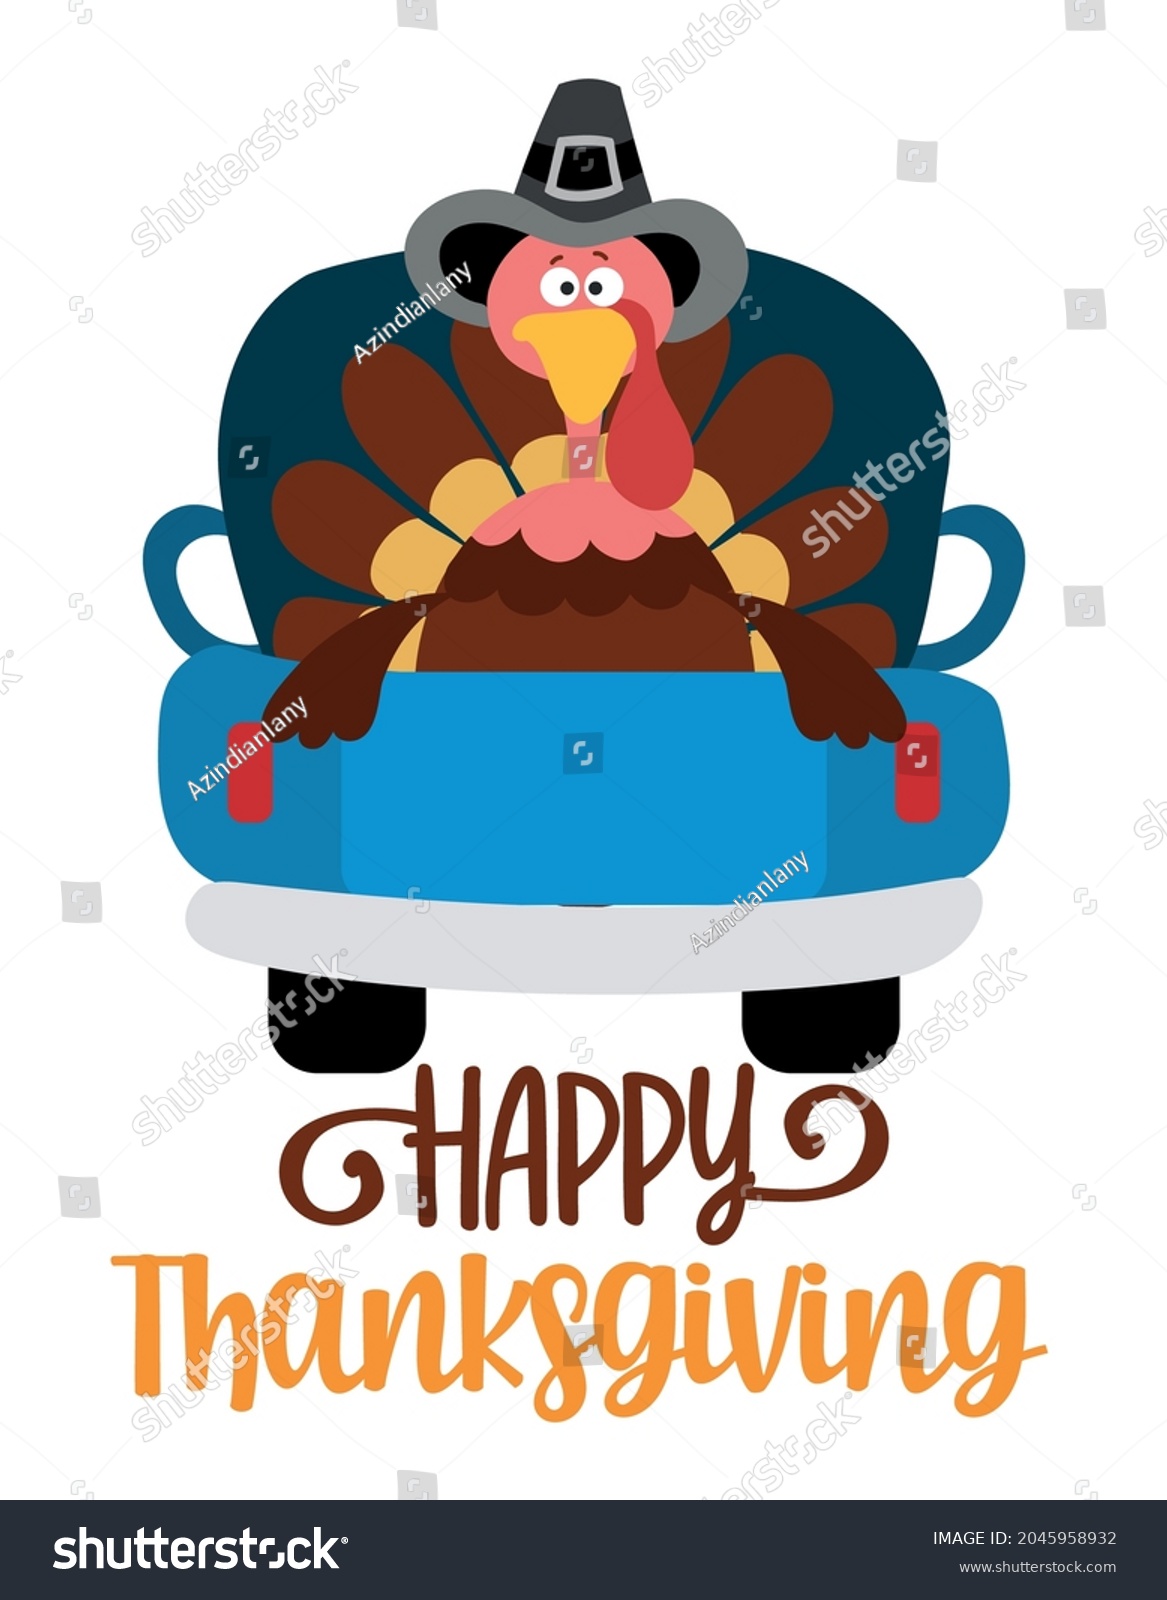 SVG of Happy Thanksgiving - Happy Harvest fall festival design for markets, restaurants, flyers, cards, invitations, stickers, banners. Cute hand drawn hayride or old pickup truck with farm cute turkey.  svg